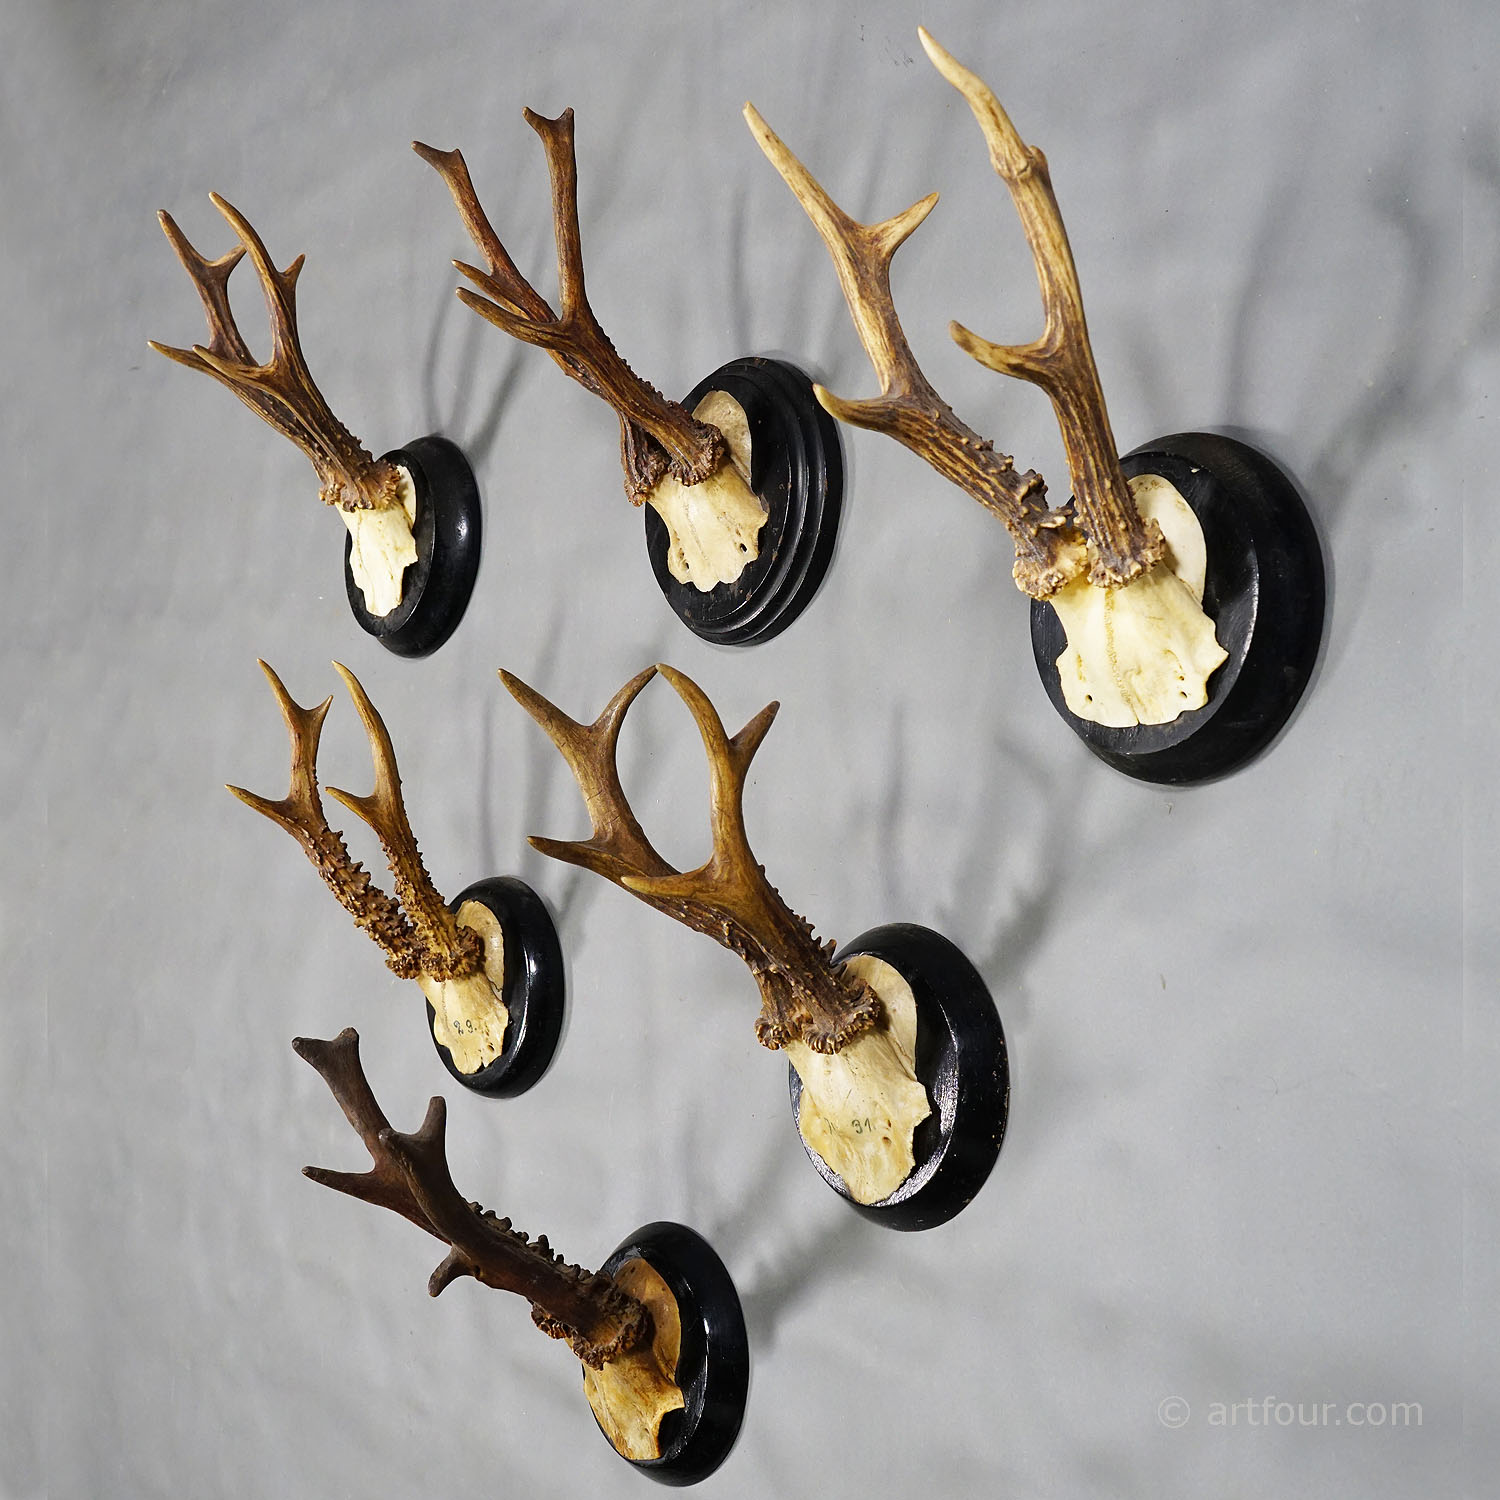 Six Antique Roe Deer Trophies on Wooden Plaques Germany ca. 1900